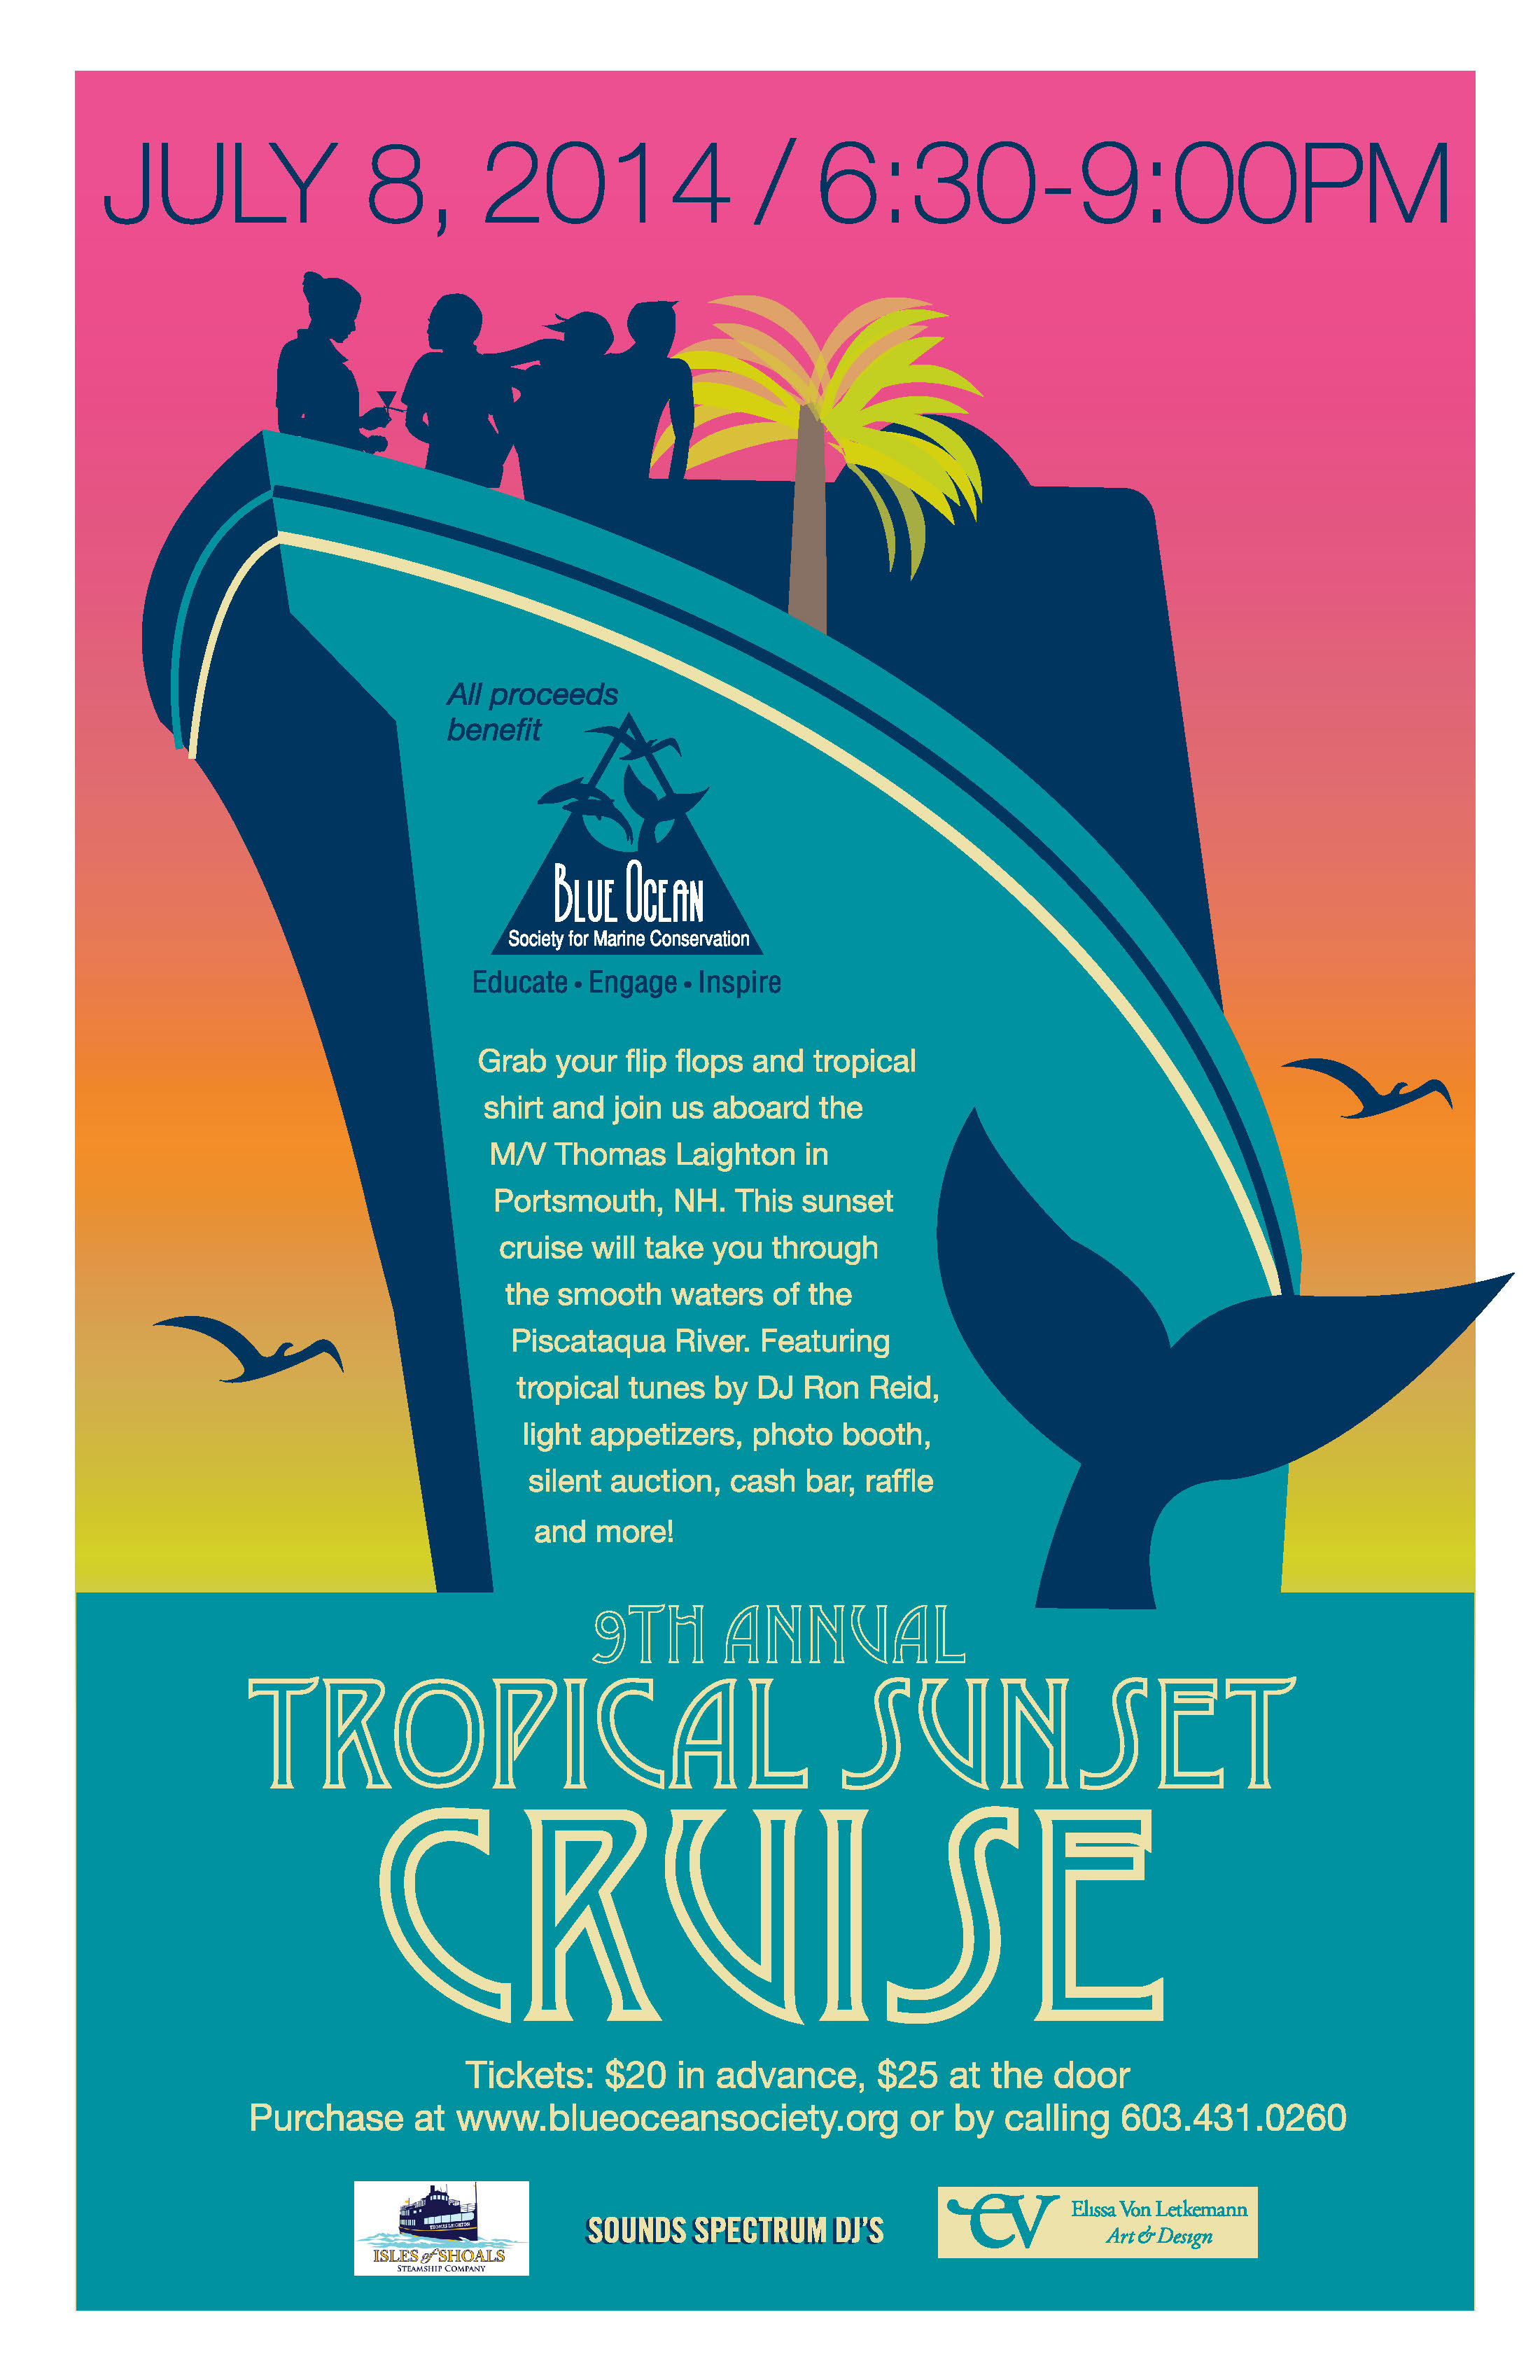 Tropical Sunset Cruise to benefit the Blue Ocean Society for Marine Conservation!  Image